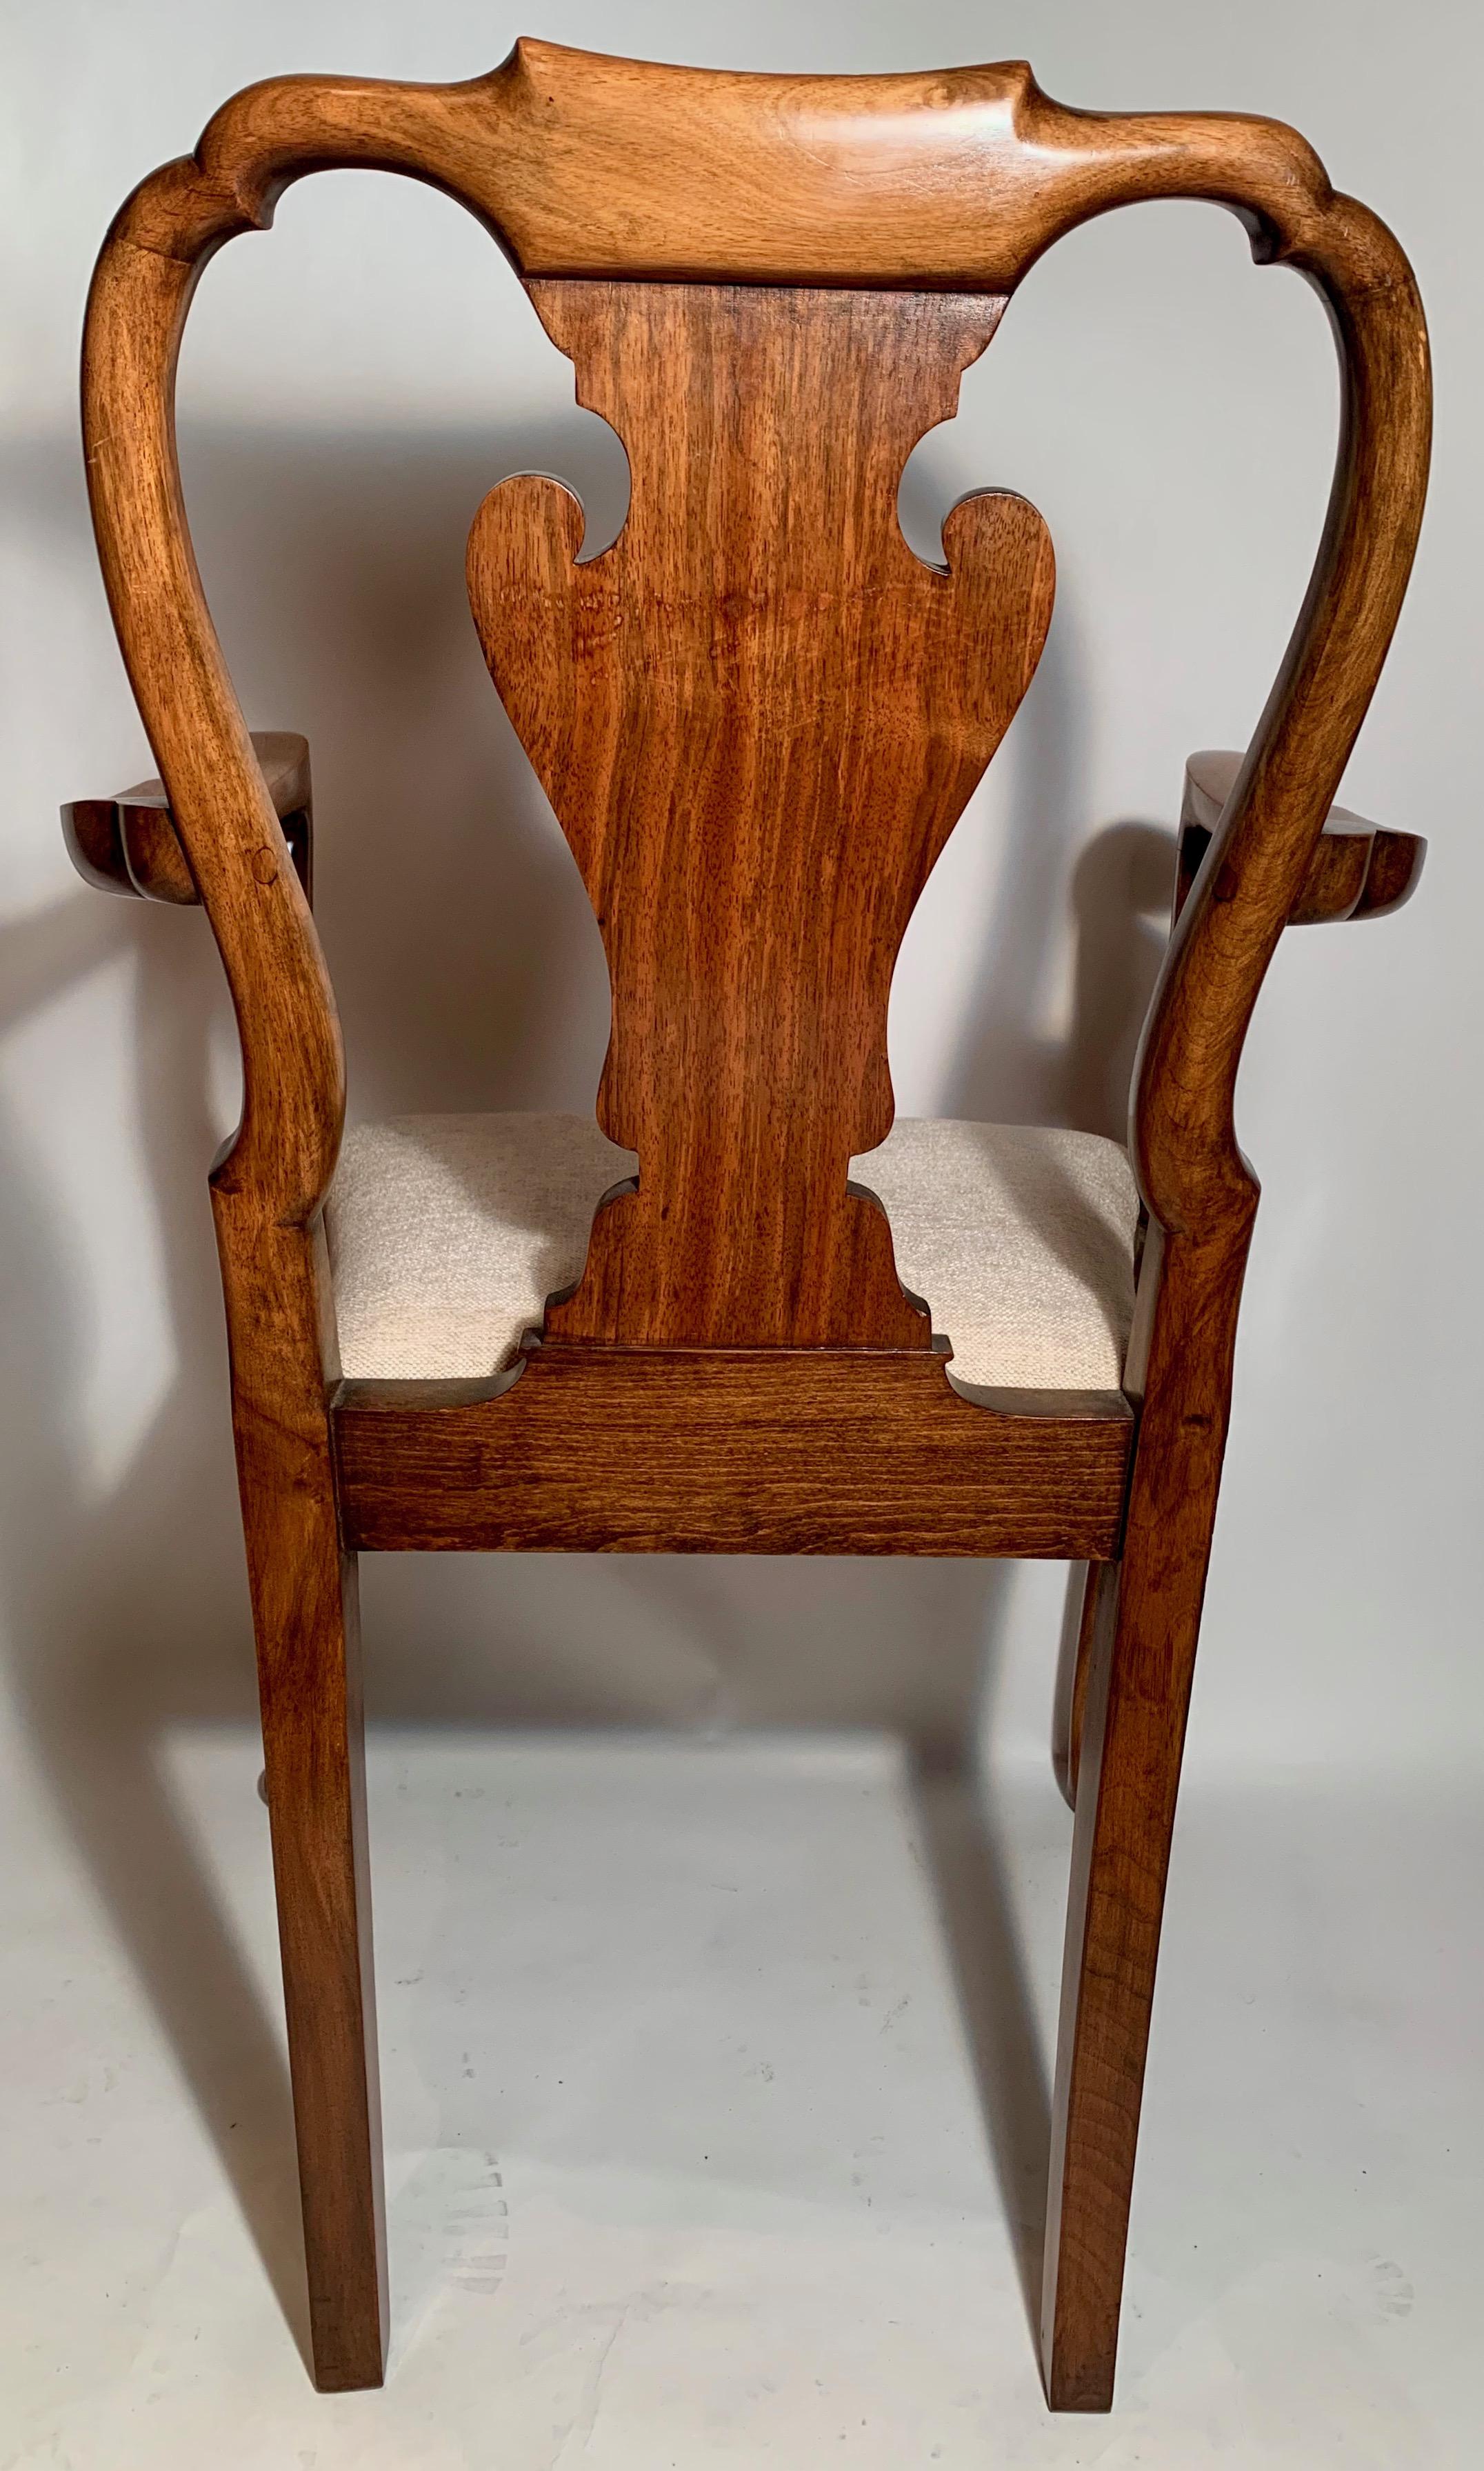 Set of 8 Antique English Queen Anne Burl Walnut Dining Chairs 1